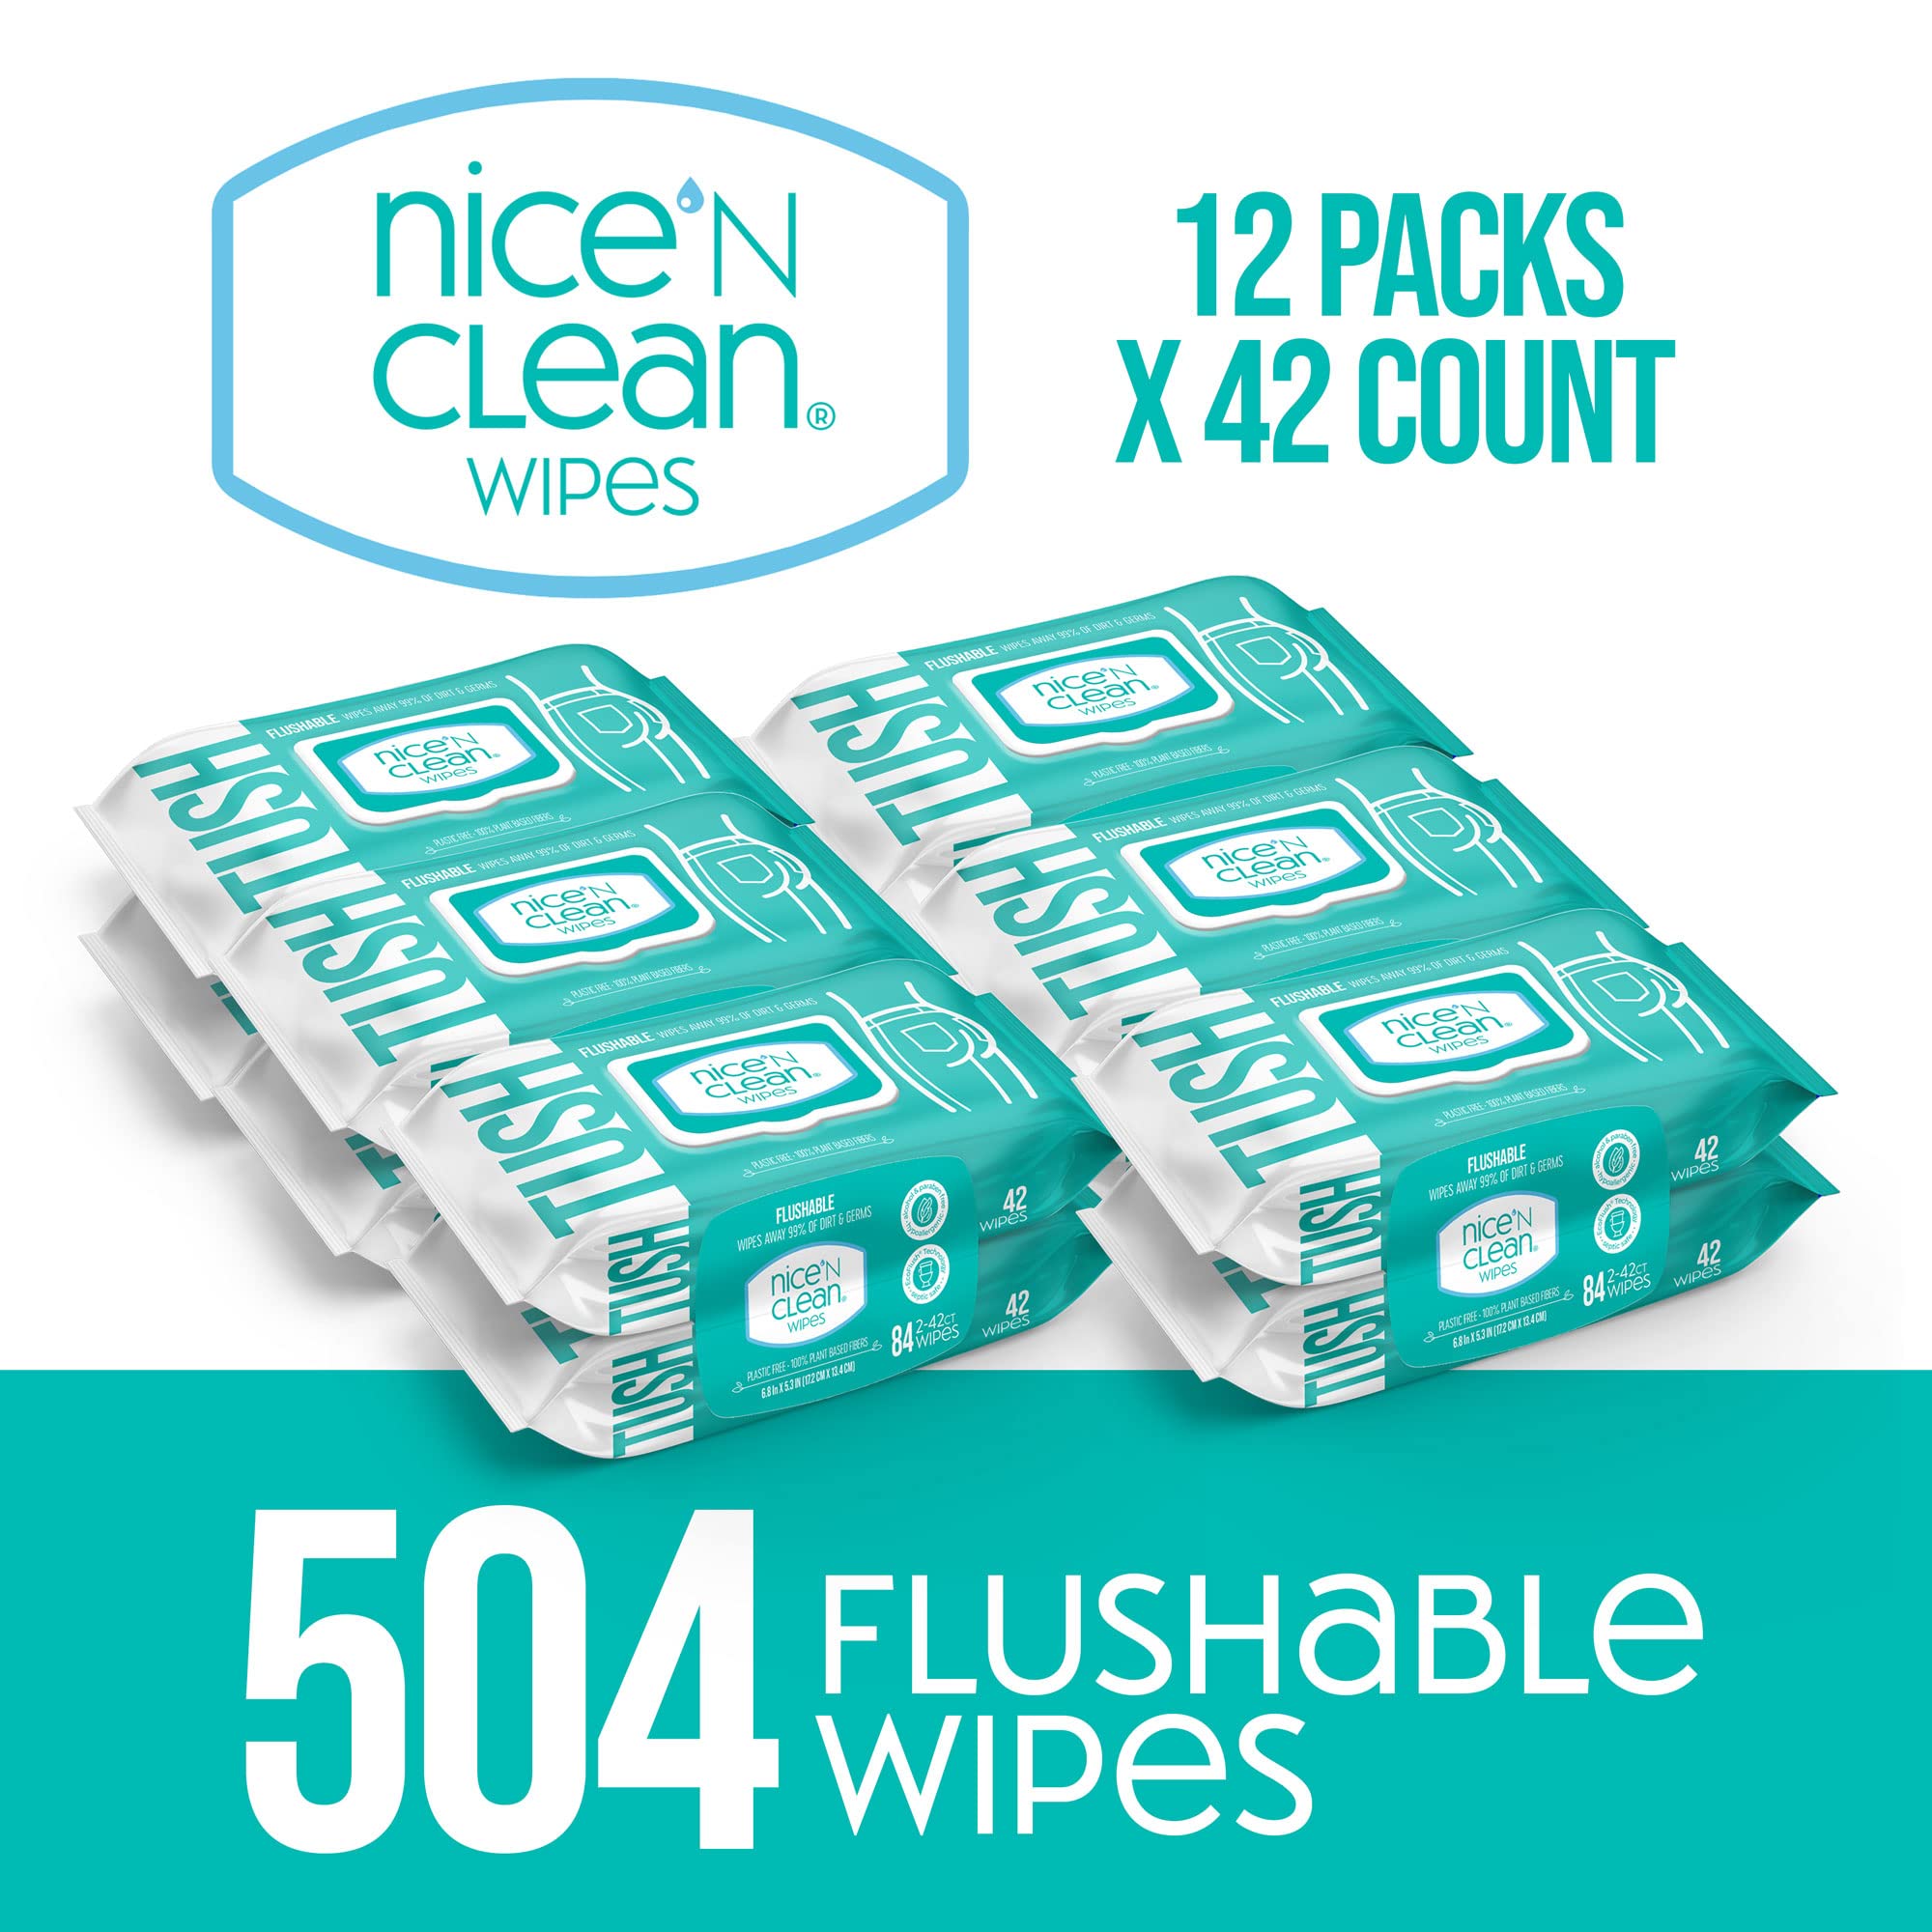 Nice 'N Clean Adult Flushable Wipes (12 x 42 Count) | Personal Cleansing Wipes Made from Plant-Based Fibers | Infused with Aloe & Vitamin E